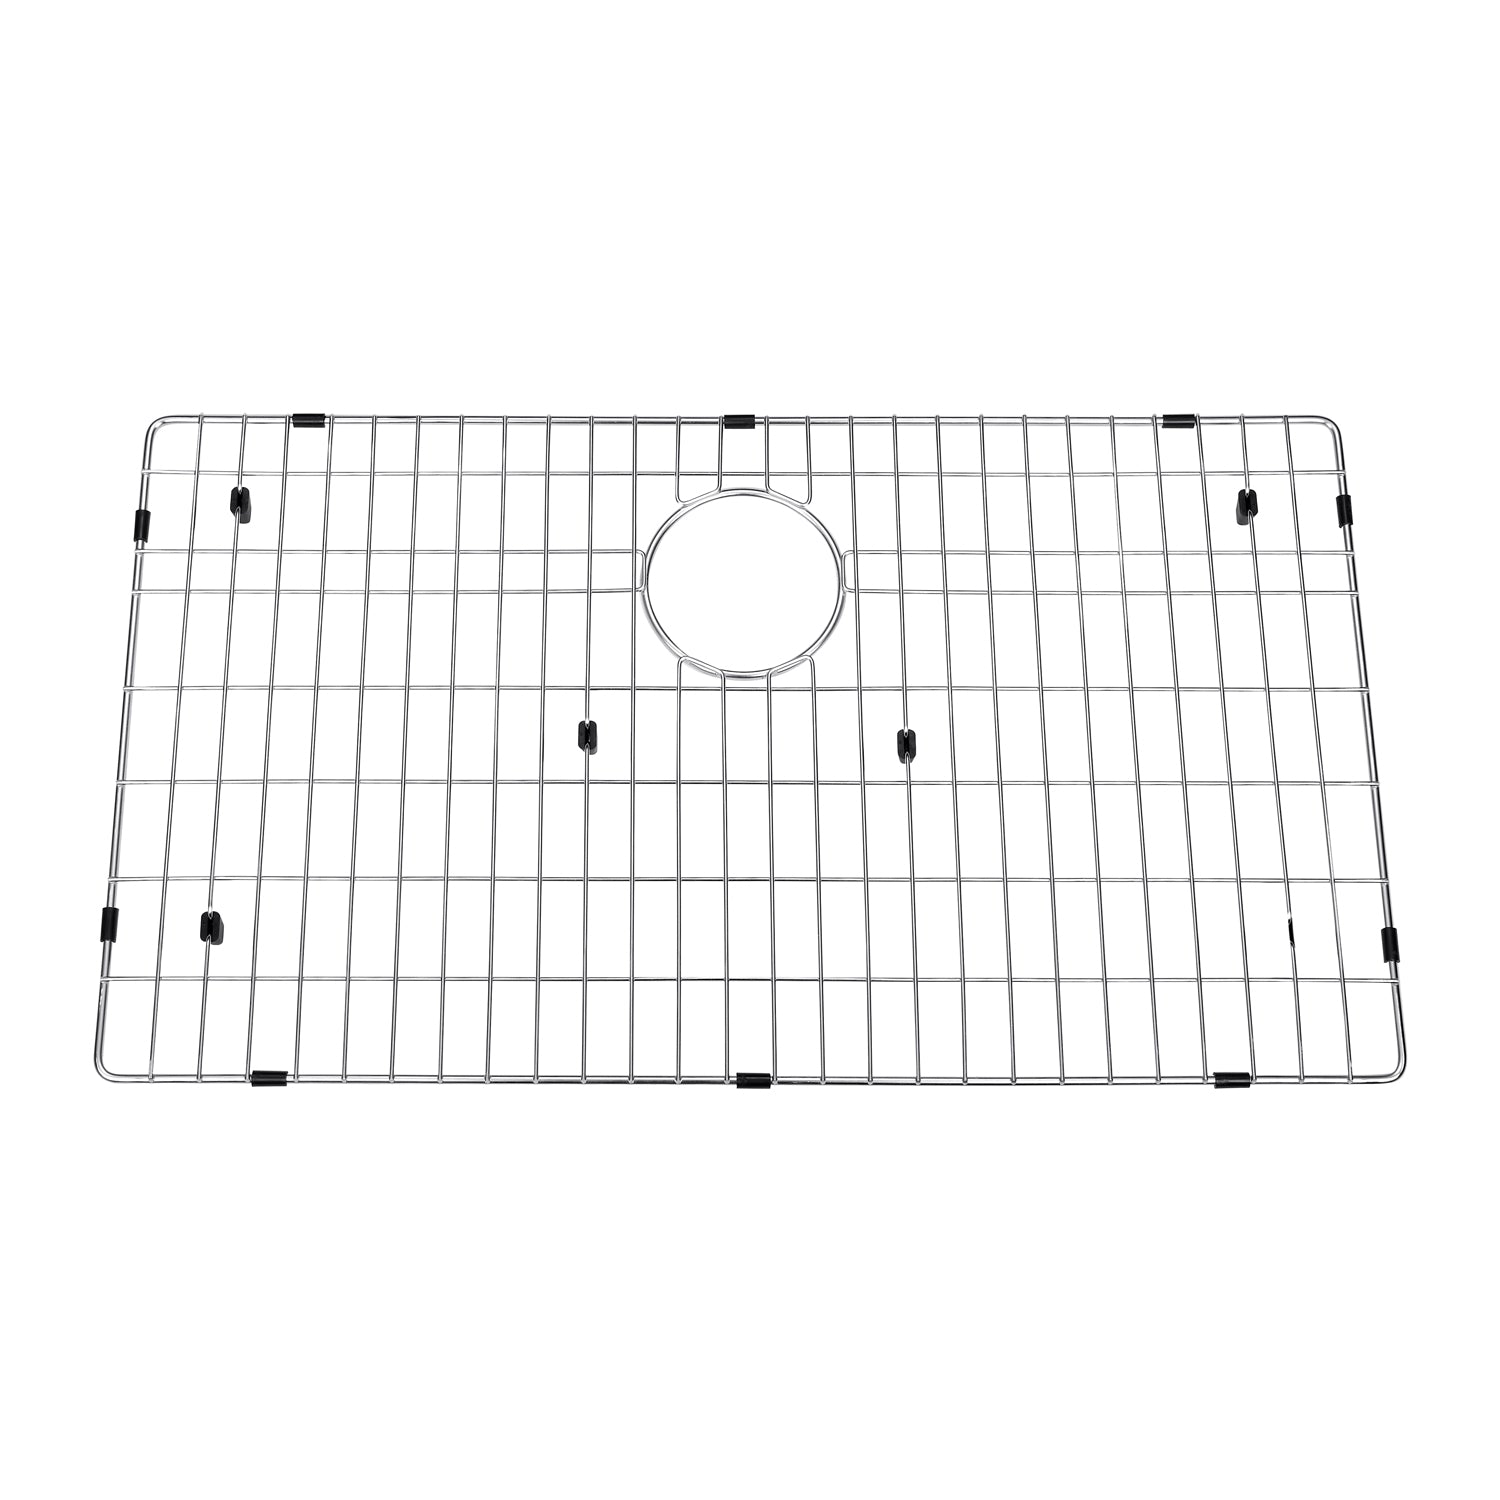 DAX Grid for Kitchen Sink, Stainless Steel Body, Chrome Finish, Compatible with DAX-SQ-3321, 30 x 16 Inches (GRID-SQ3321)